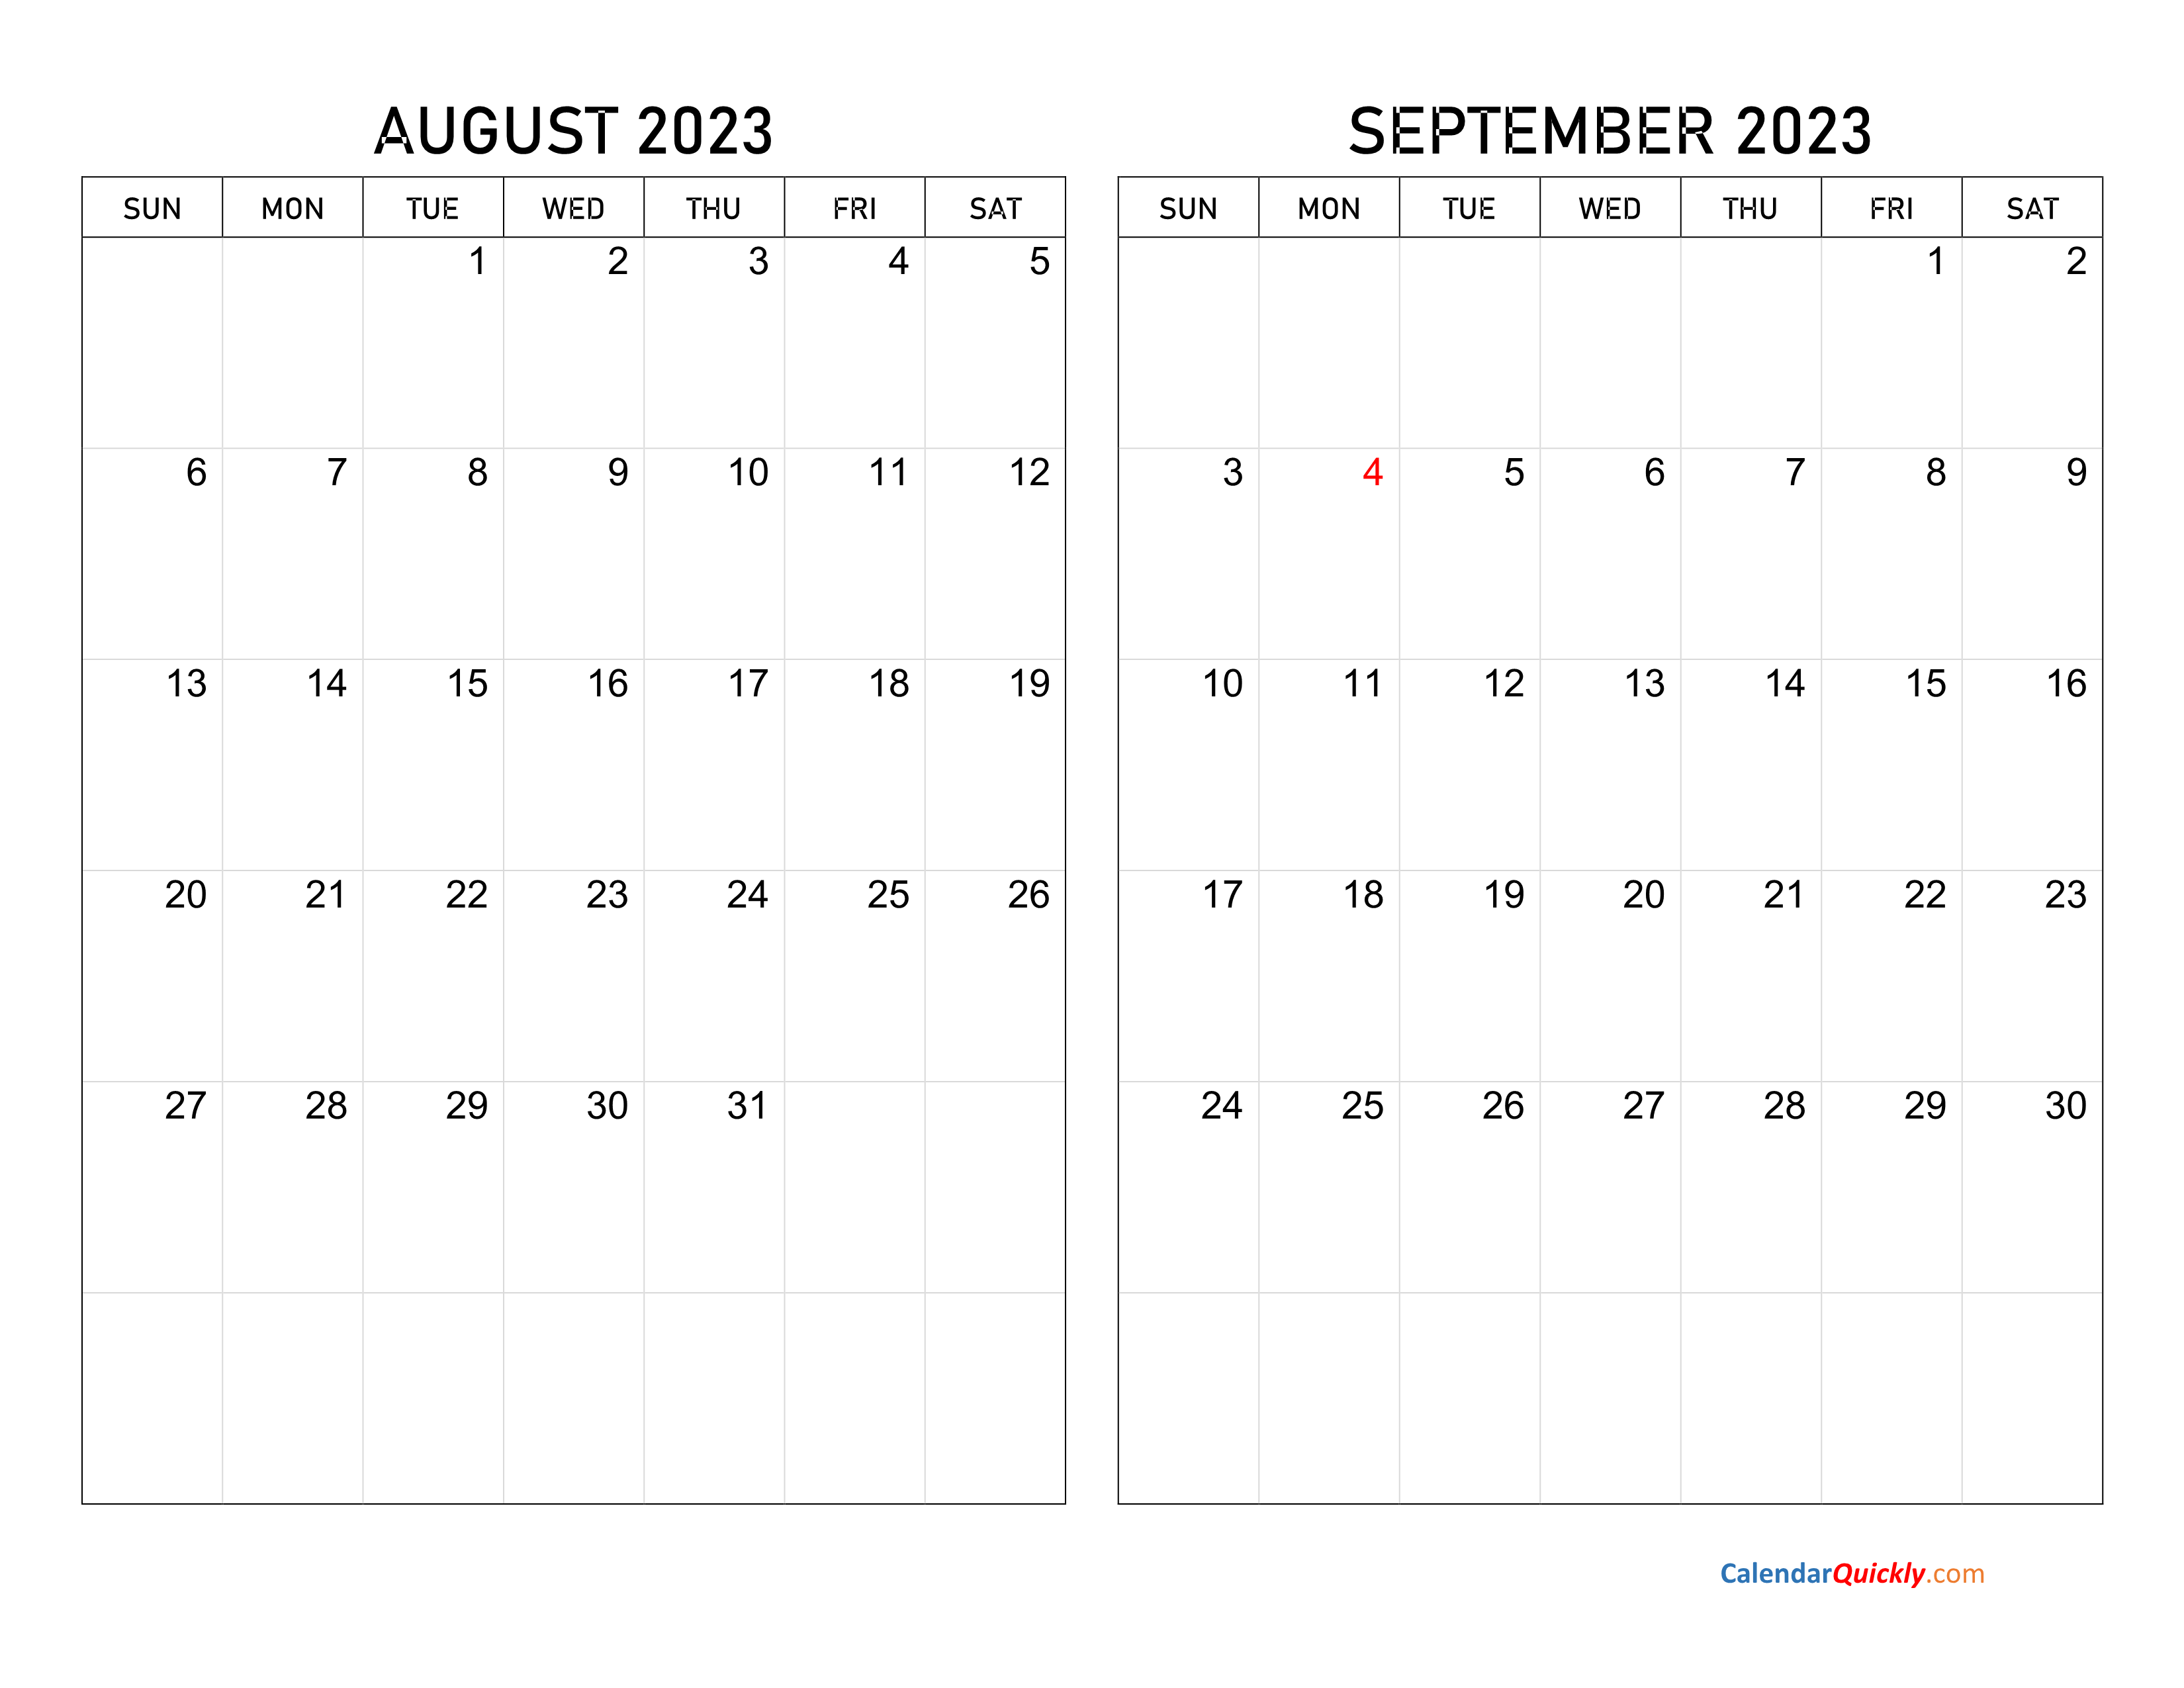 collection of september 2023 photo calendars with image filters